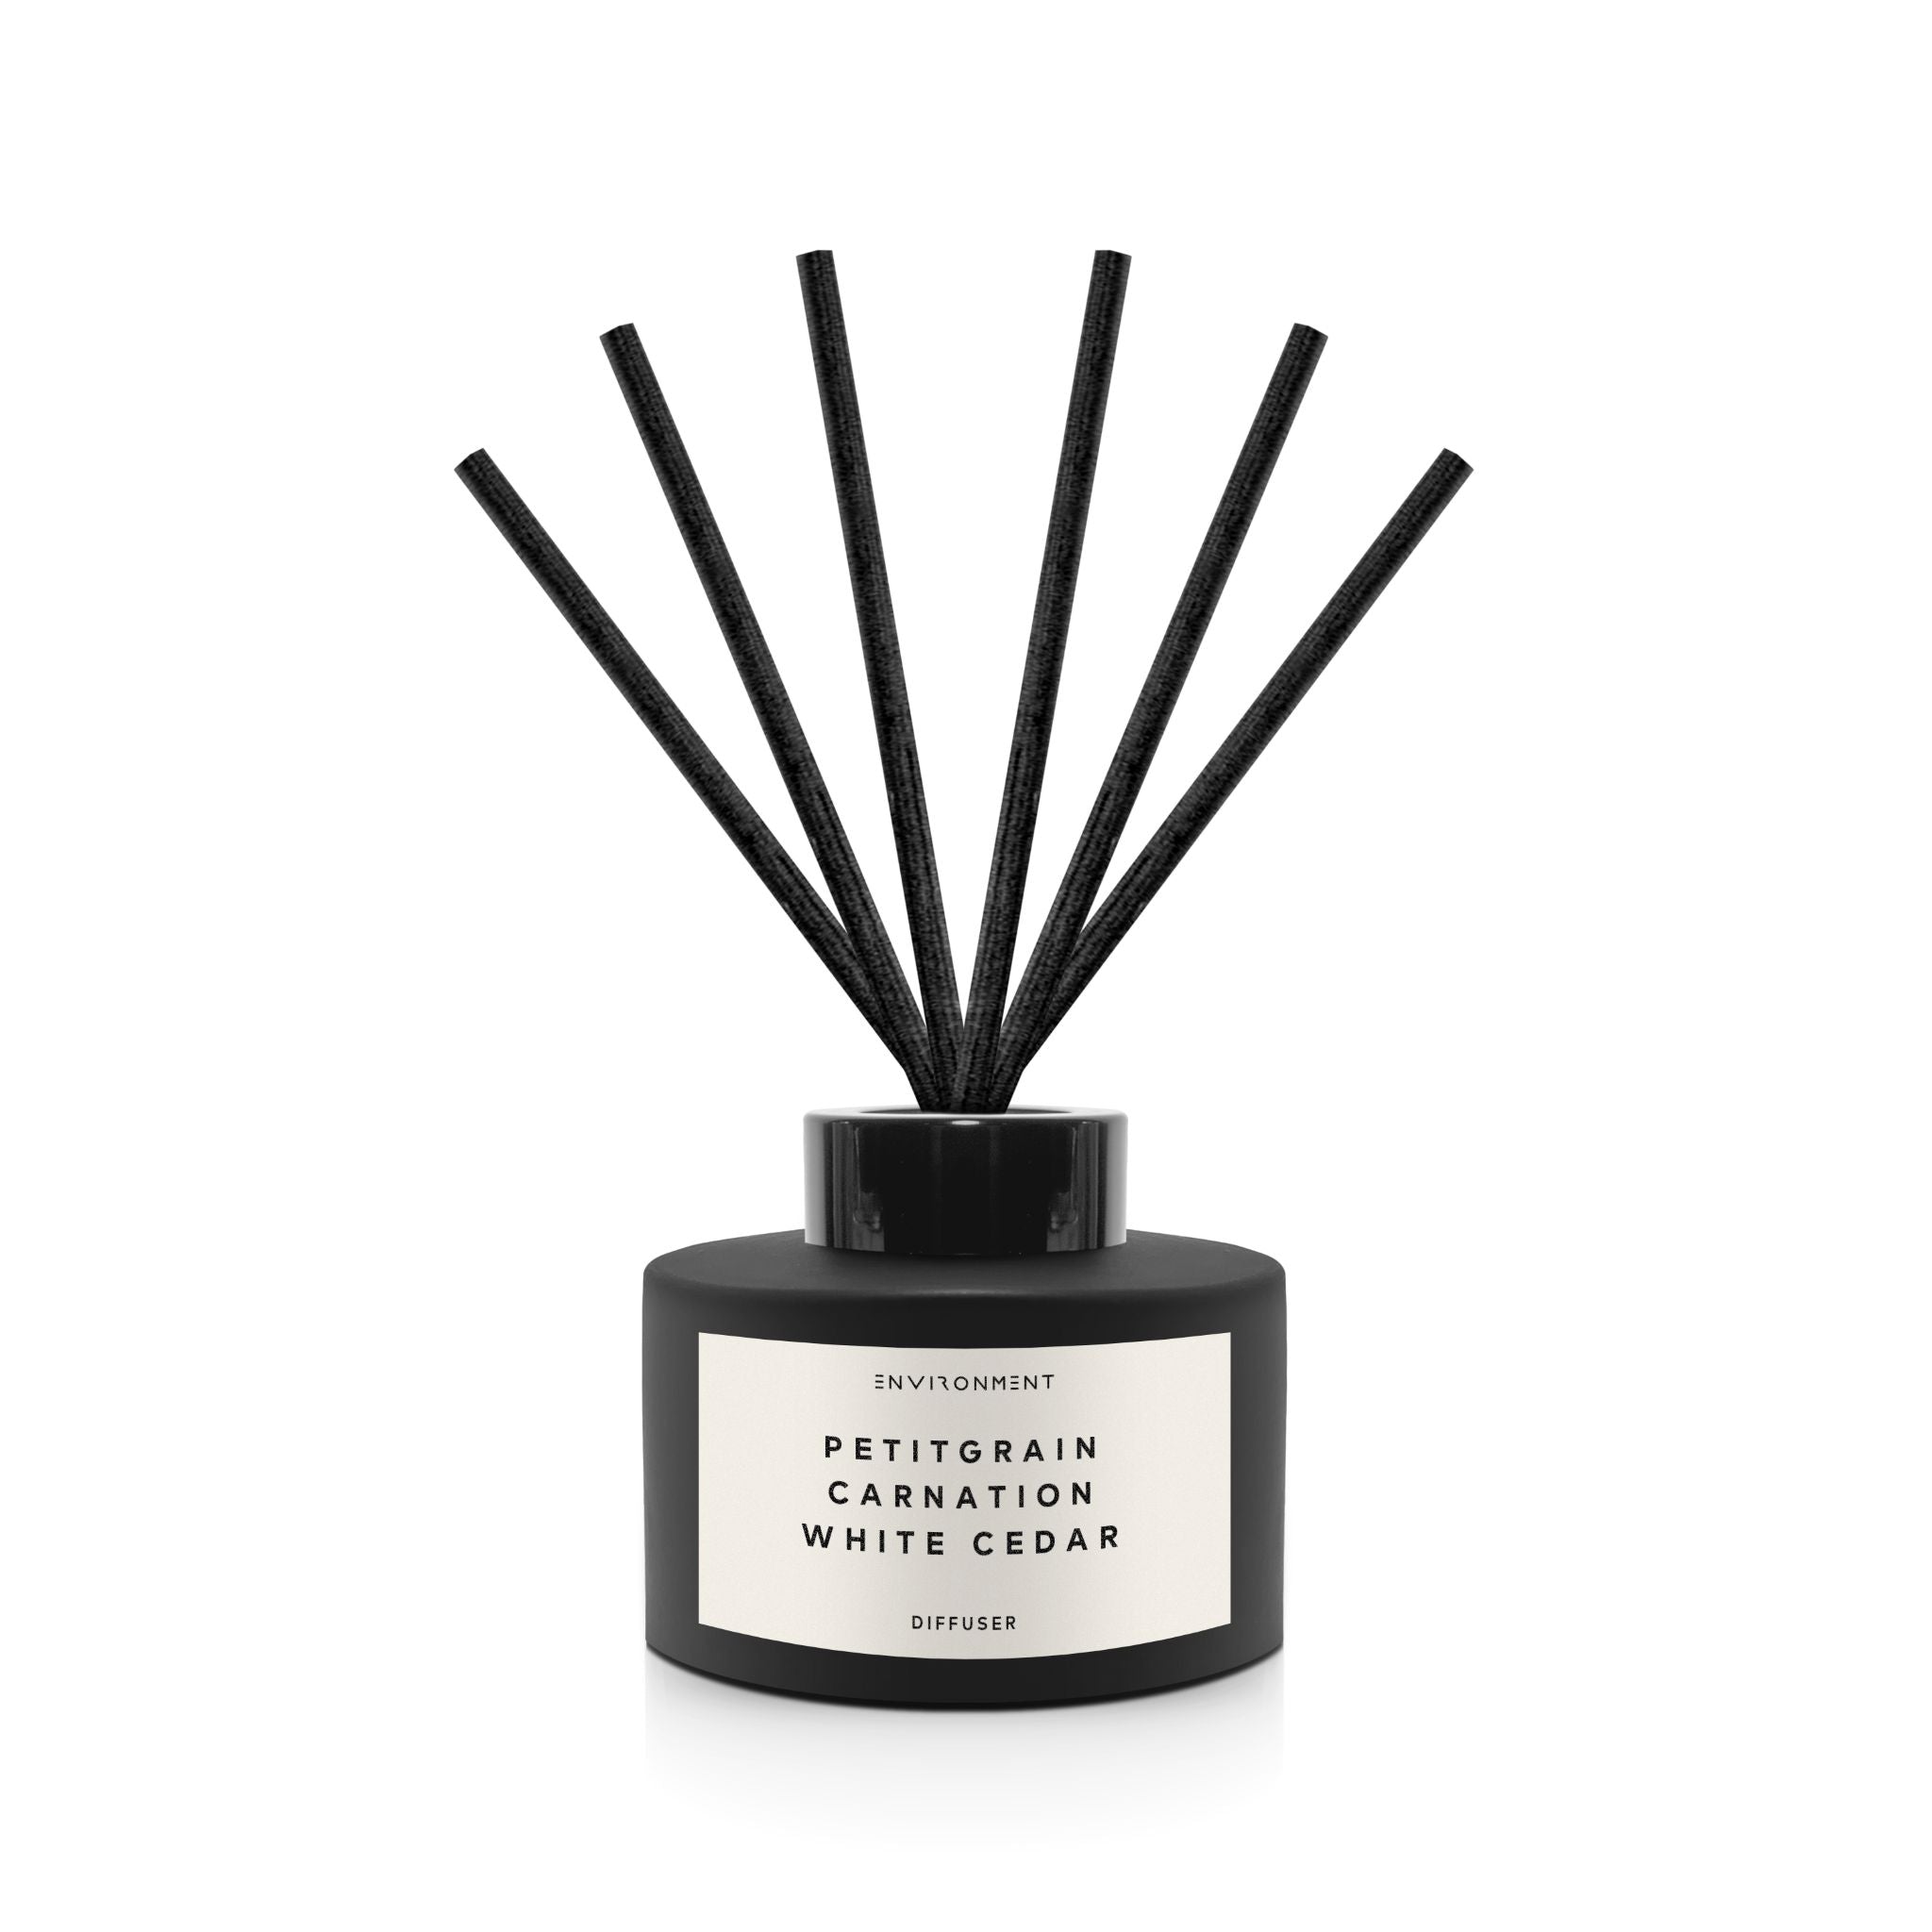 Petitgrain | Carnation | White Cedar 200ml Diffuser and 8oz Candle Gift Pack (Inspired by YSL L'Homme®)